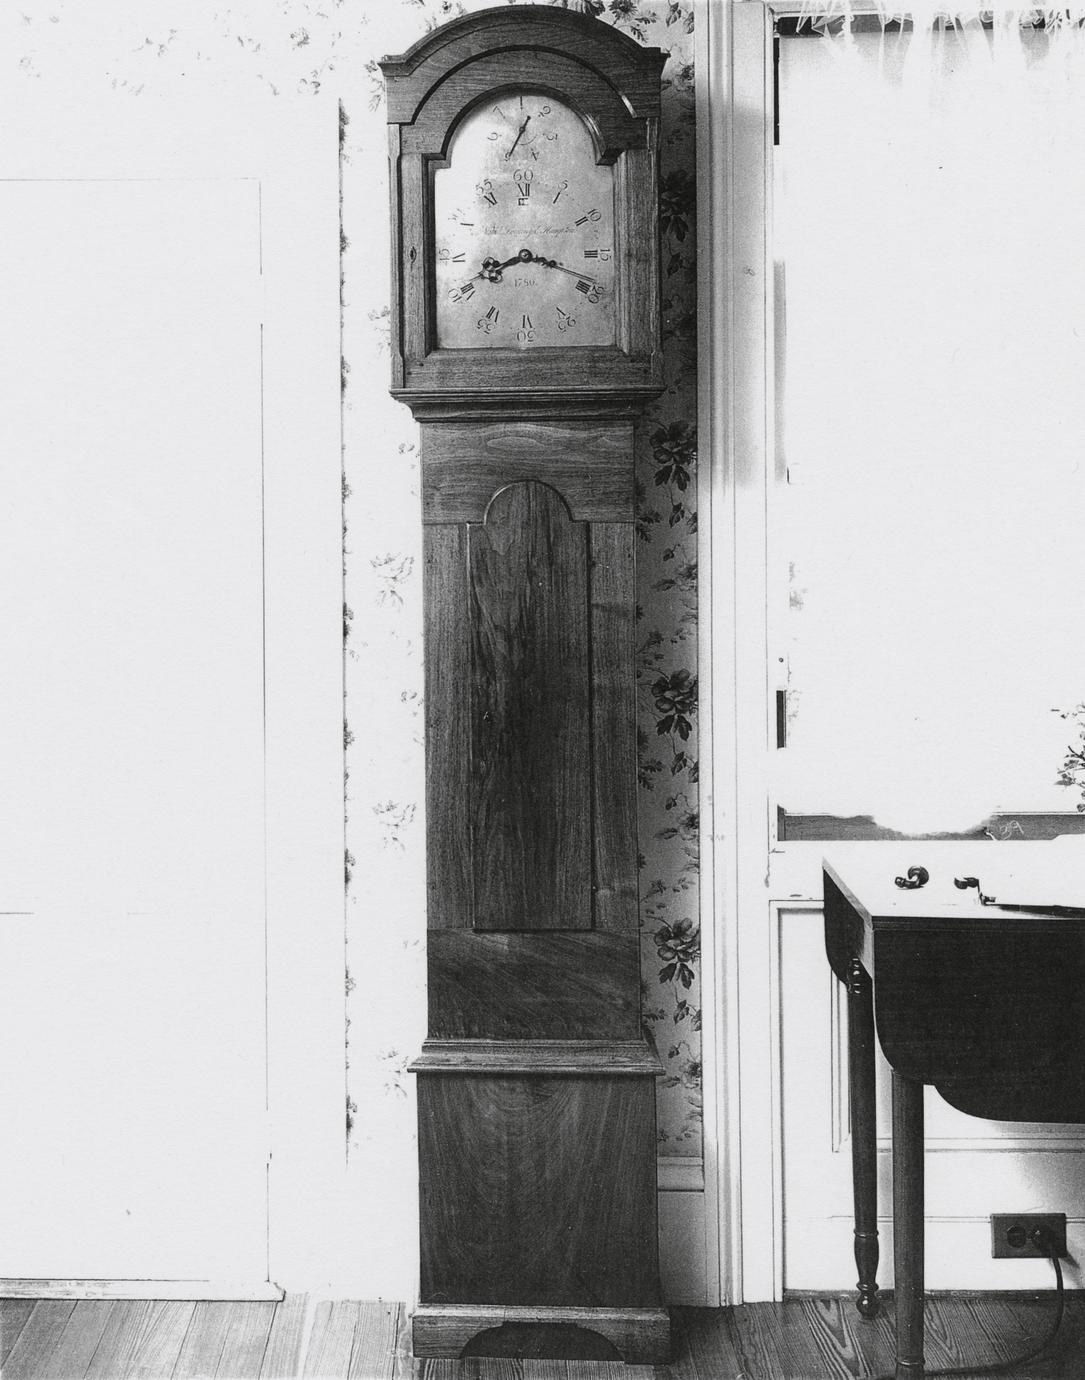 Black and white photograph of a eight-day, strike, and repeater clock.